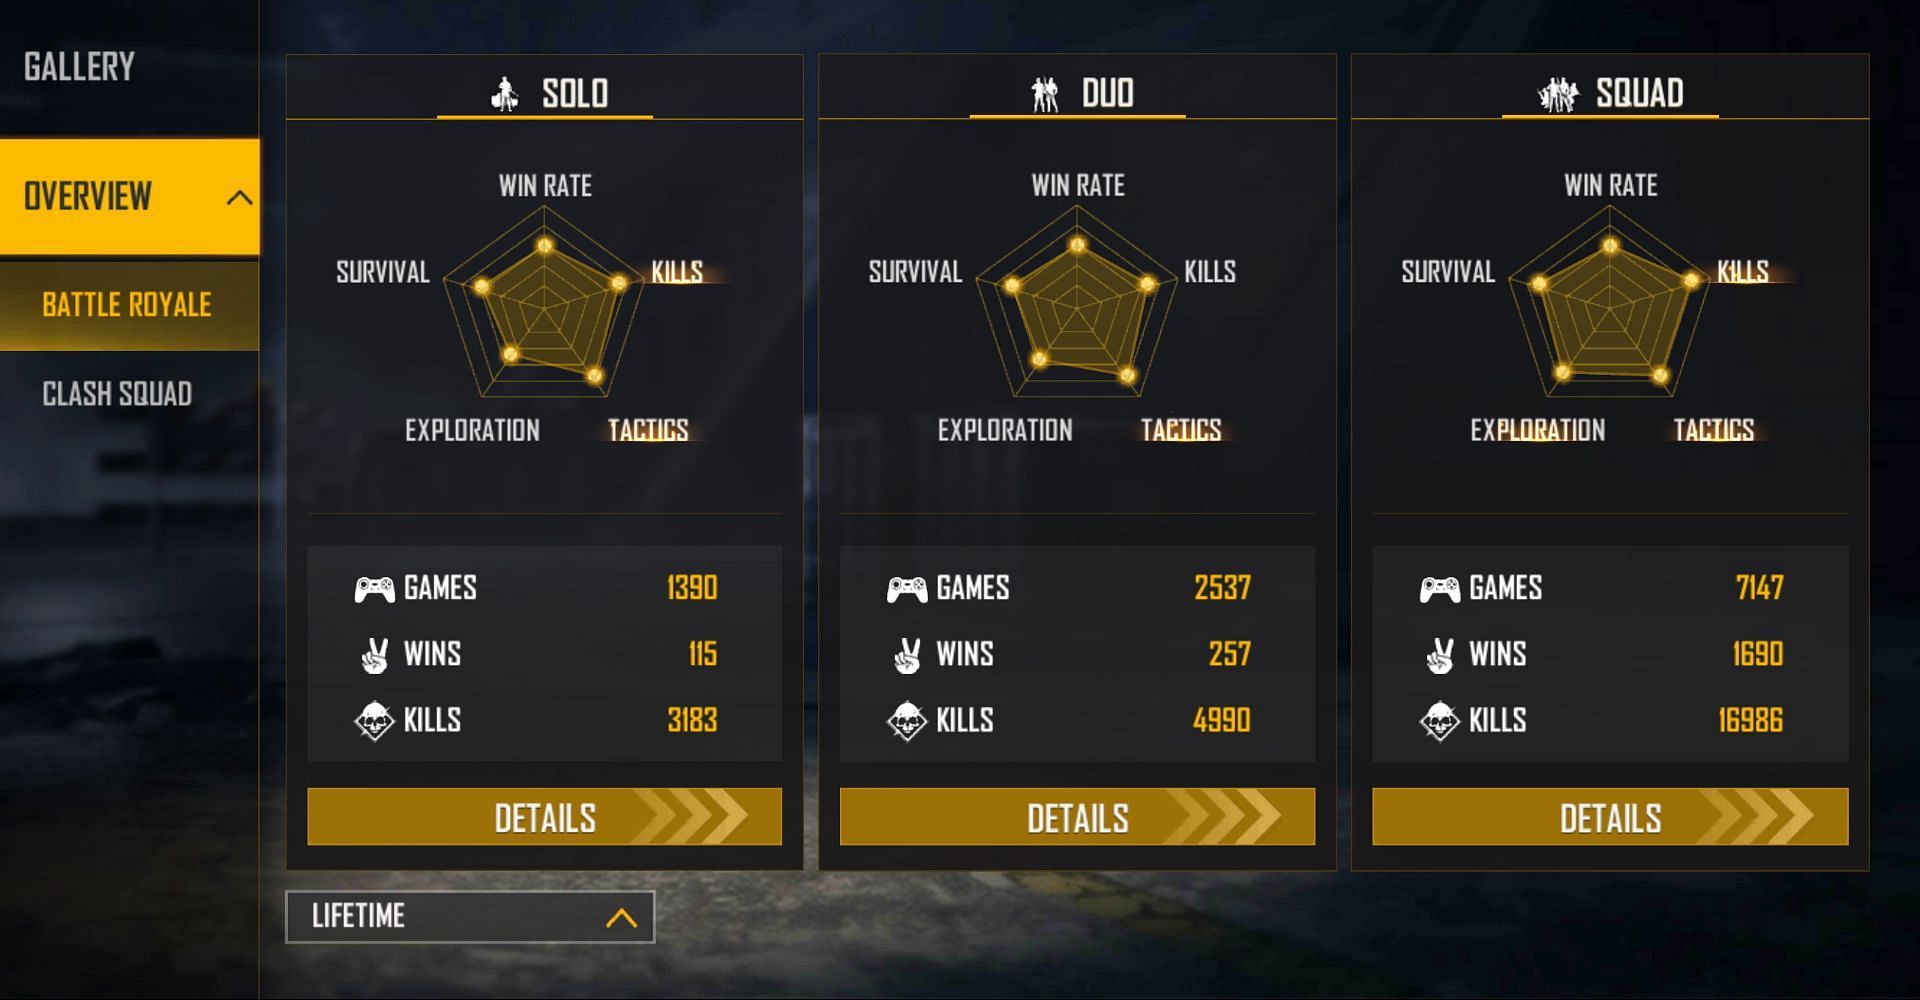 TSG Jash boasts 16986 frags in squad games (Image via Free Fire)